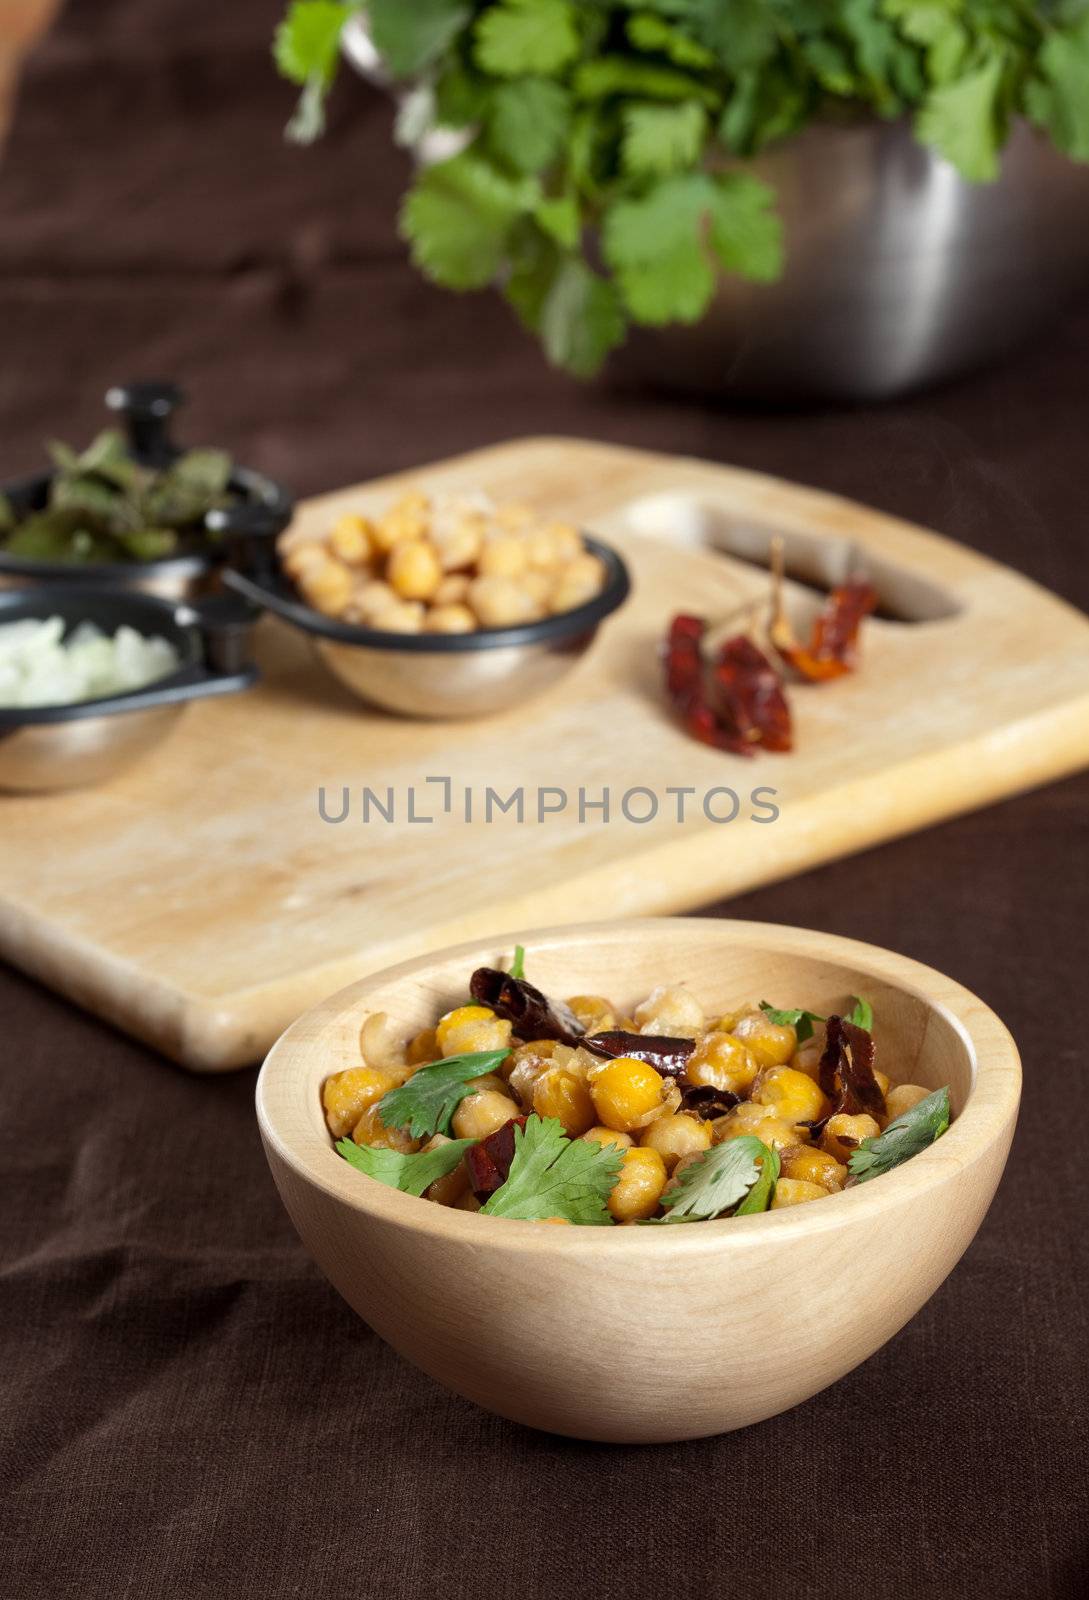 Chickpea appetizer by Fotosmurf